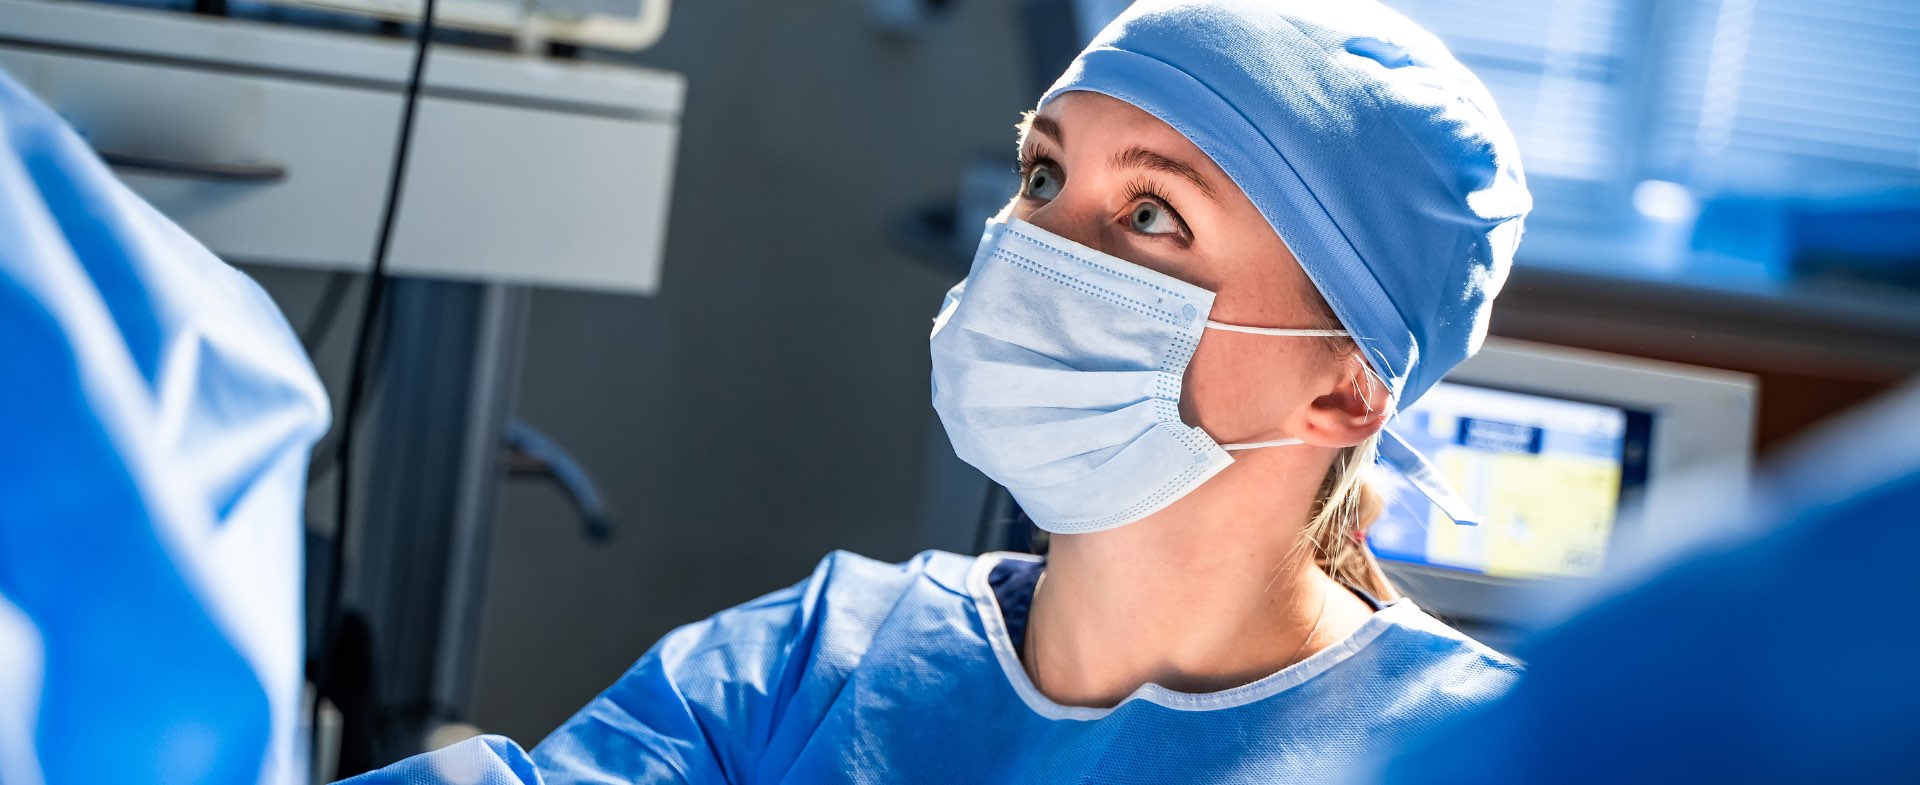 Anesthesiologist. Woman in OR.